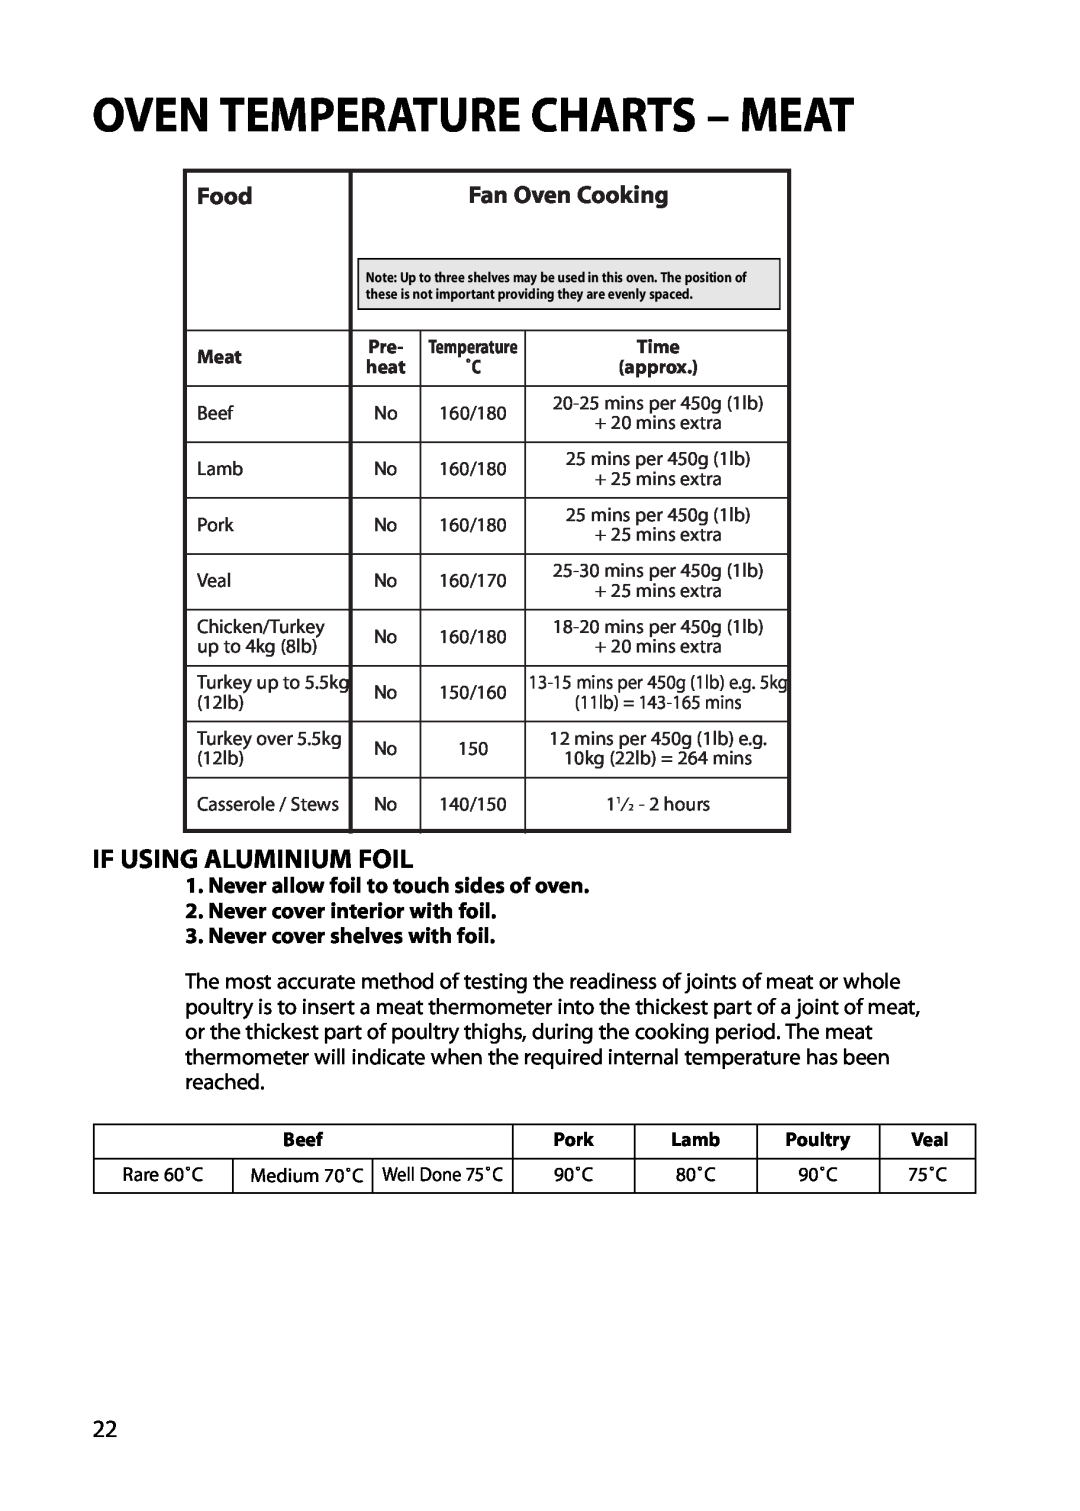 Creda REFLECTION manual Oven Temperature Charts – Meat, If Using Aluminium Foil, Never allow foil to touch sides of oven 